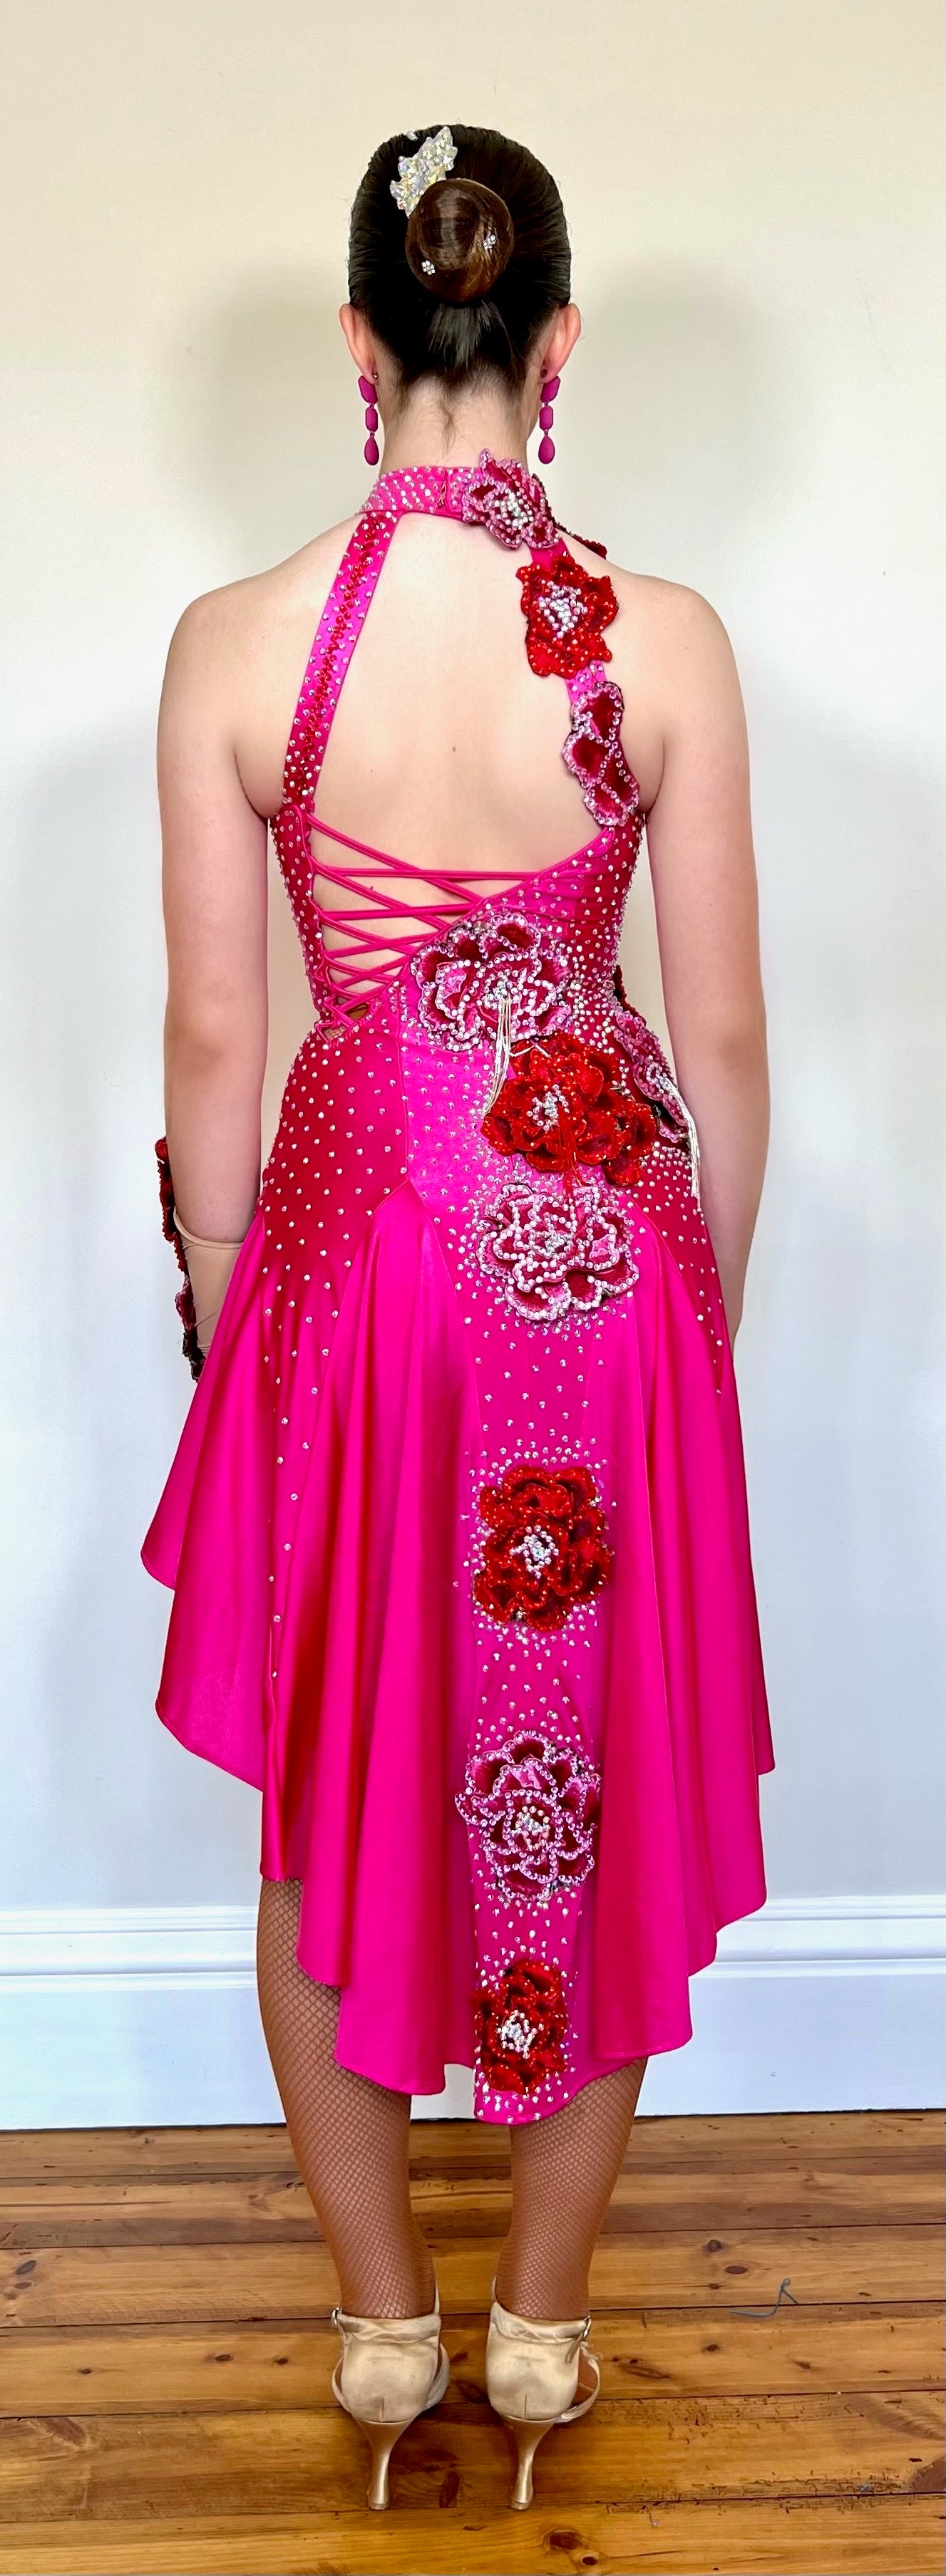 018 Magenta Halter neck style Latin dress. Shaped skirt with side split. 3D flower decorations to the front & back of bodice. Flowers to wrist cuff.